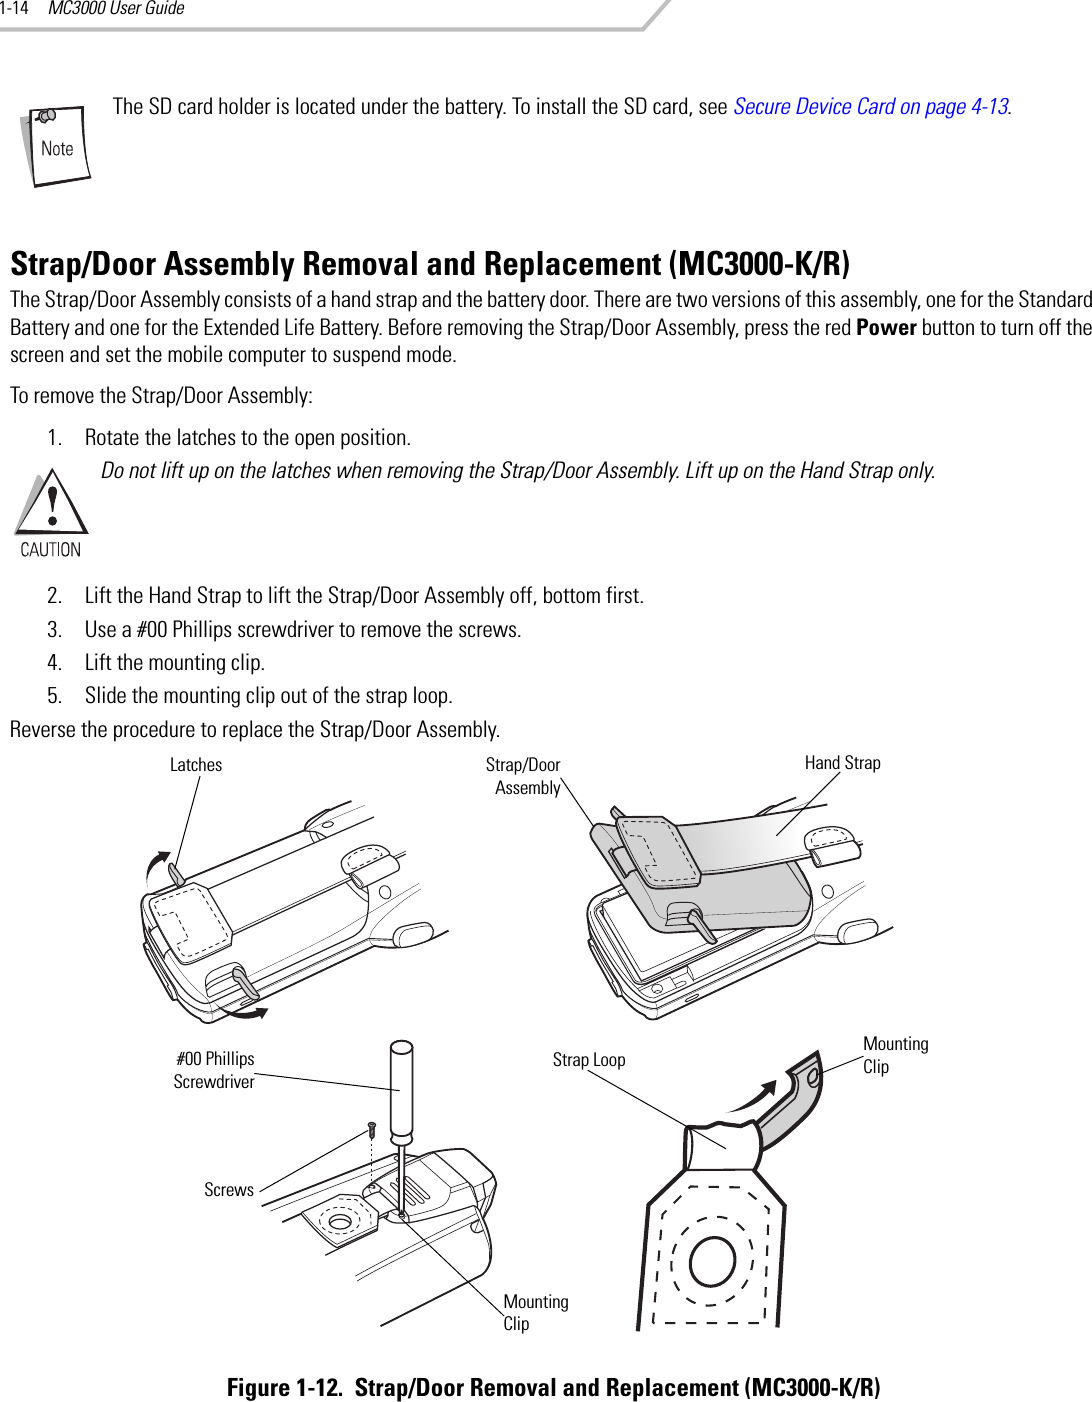 MC3000 User Guide1-14The SD card holder is located under the battery. To install the SD card, see Secure Device Card on page 4-13.Strap/Door Assembly Removal and Replacement (MC3000-K/R)The Strap/Door Assembly consists of a hand strap and the battery door. There are two versions of this assembly, one for the Standard Battery and one for the Extended Life Battery. Before removing the Strap/Door Assembly, press the red Power button to turn off the screen and set the mobile computer to suspend mode.To remove the Strap/Door Assembly:1. Rotate the latches to the open position.Do not lift up on the latches when removing the Strap/Door Assembly. Lift up on the Hand Strap only.2. Lift the Hand Strap to lift the Strap/Door Assembly off, bottom first.3. Use a #00 Phillips screwdriver to remove the screws.4. Lift the mounting clip.5. Slide the mounting clip out of the strap loop.Reverse the procedure to replace the Strap/Door Assembly.Figure 1-12.  Strap/Door Removal and Replacement (MC3000-K/R)Strap/DoorAssemblyLatchesScrews#00 PhillipsScrewdriverMounting ClipStrap LoopMounting ClipHand Strap